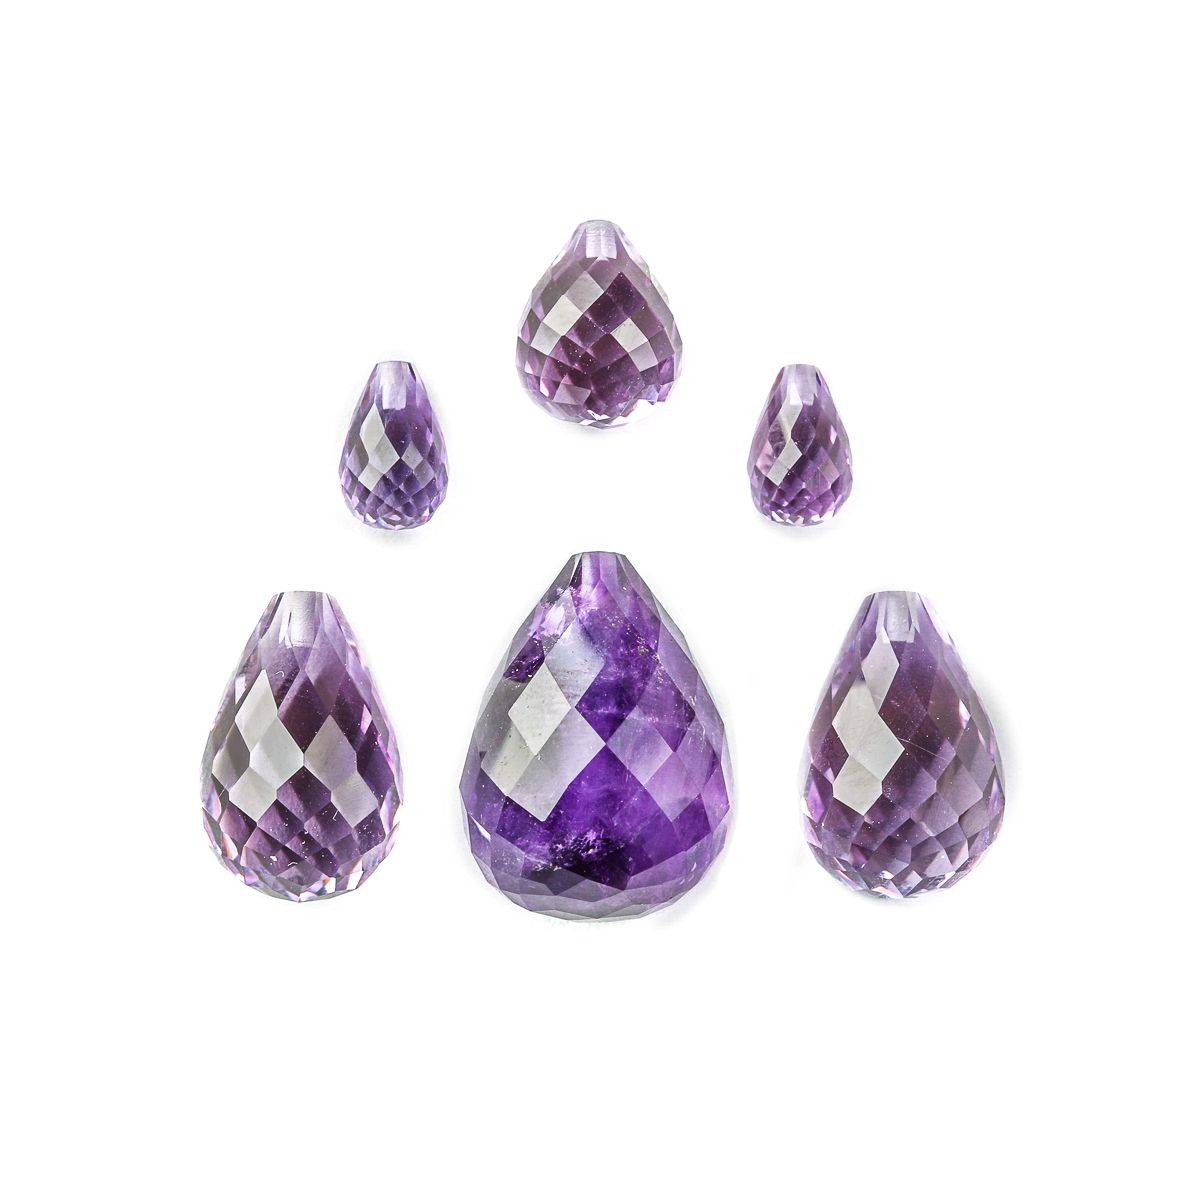 Crystal 12x13mm Opaque Purple Faceted Top Drilled Teardrop Beads with  Golden Foil Edges - 7 inch strand